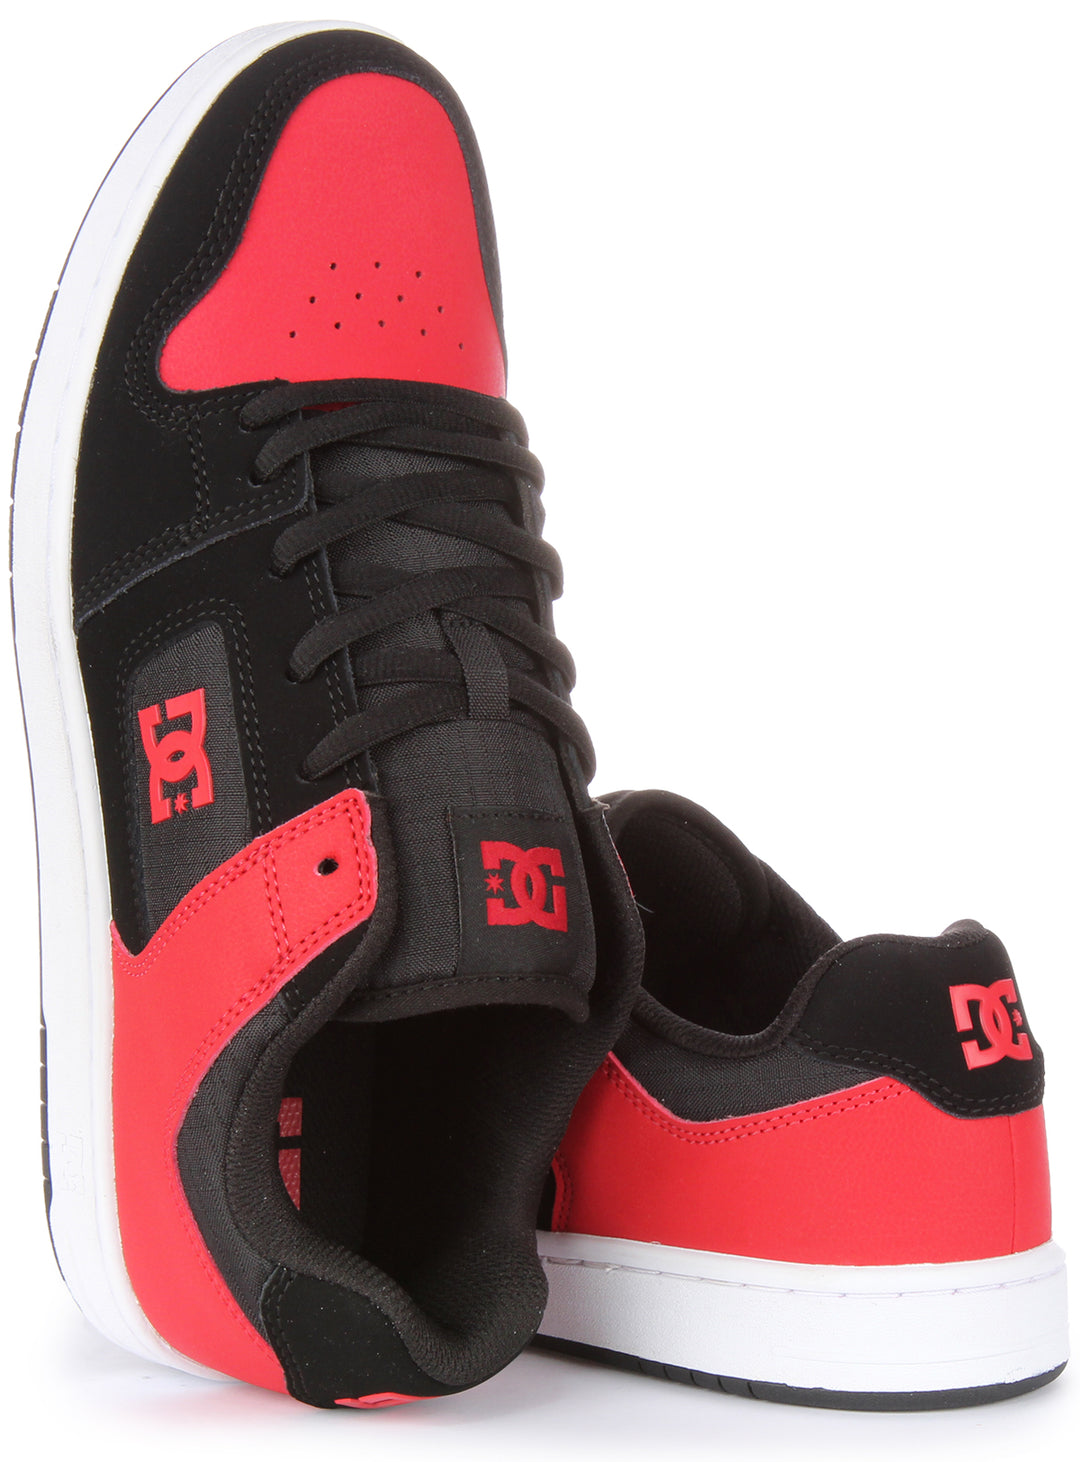 Dc Shoes Manteca 4 In Black Red For Unisex